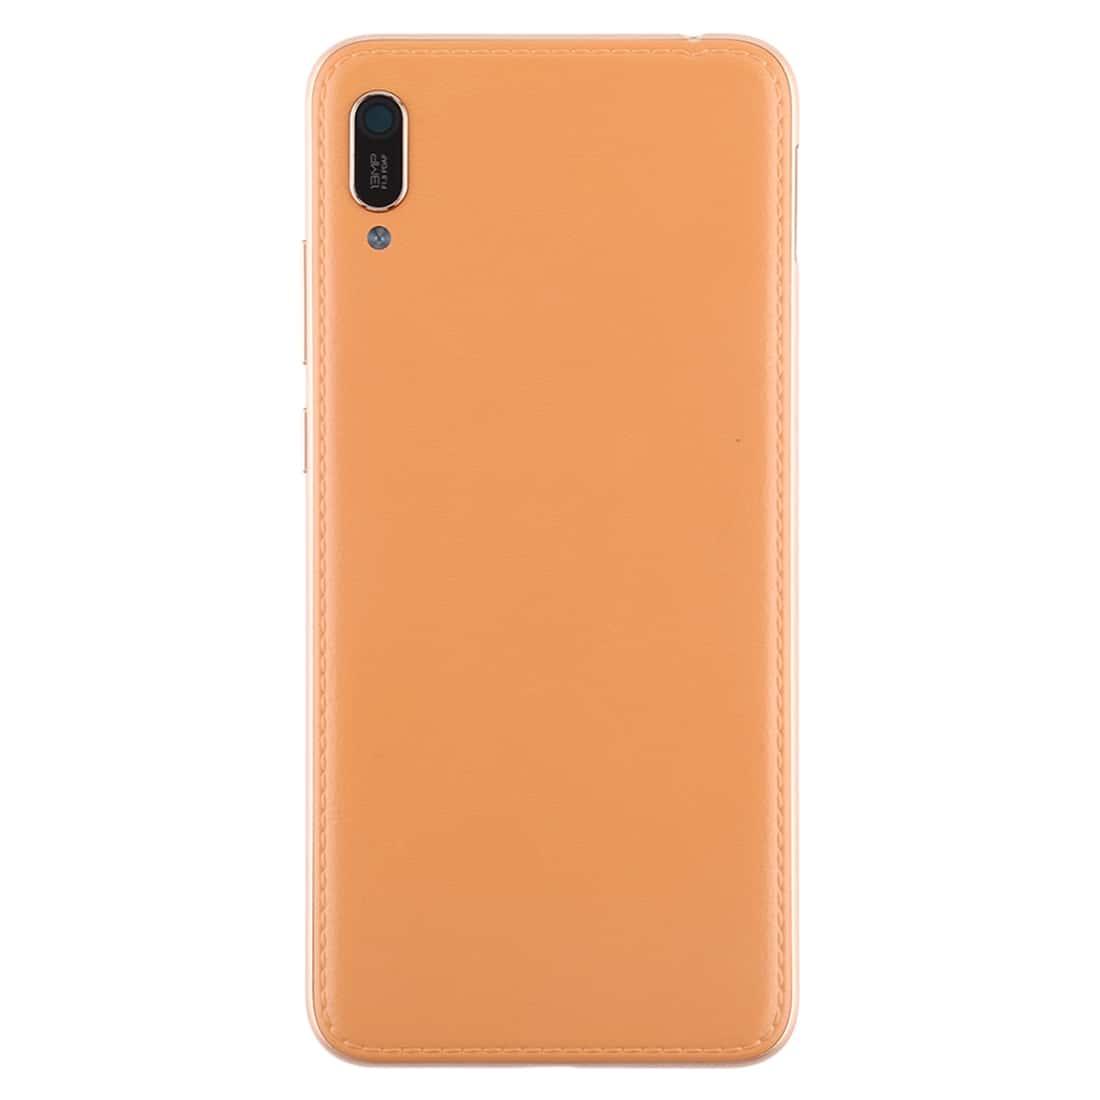 Back Panel Housing Body for Huawei Y6 Pro 2019 Coffee